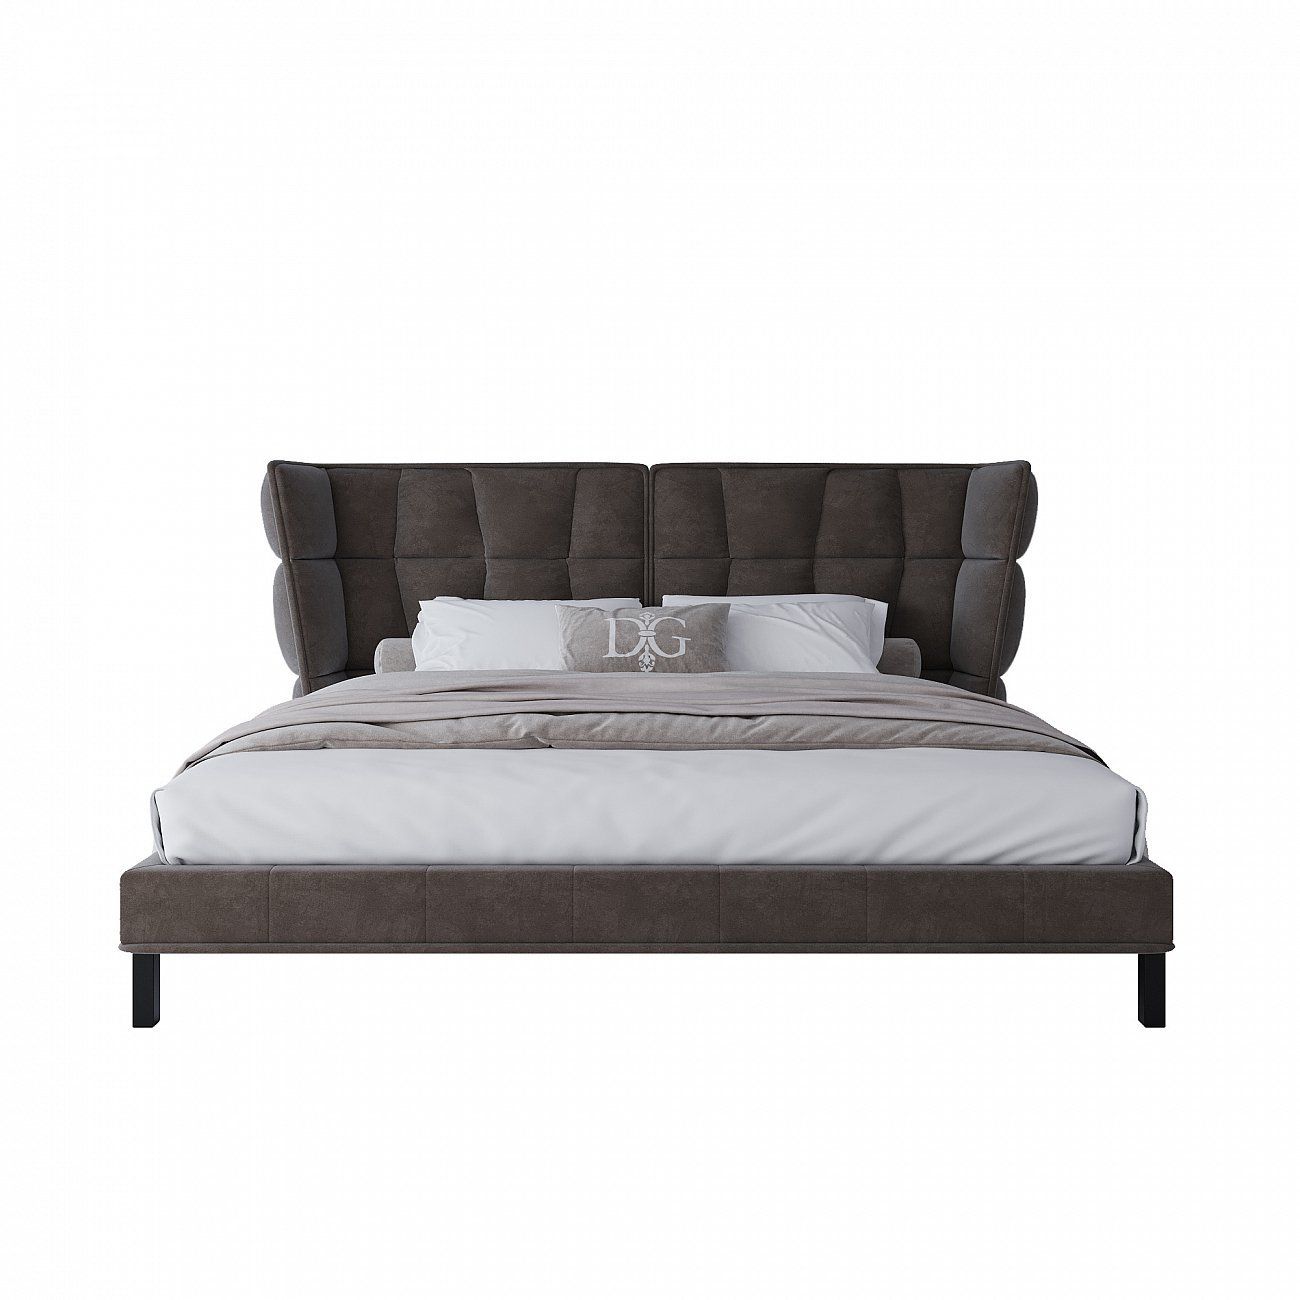 Double bed 200x200 grey Husk (box spring)